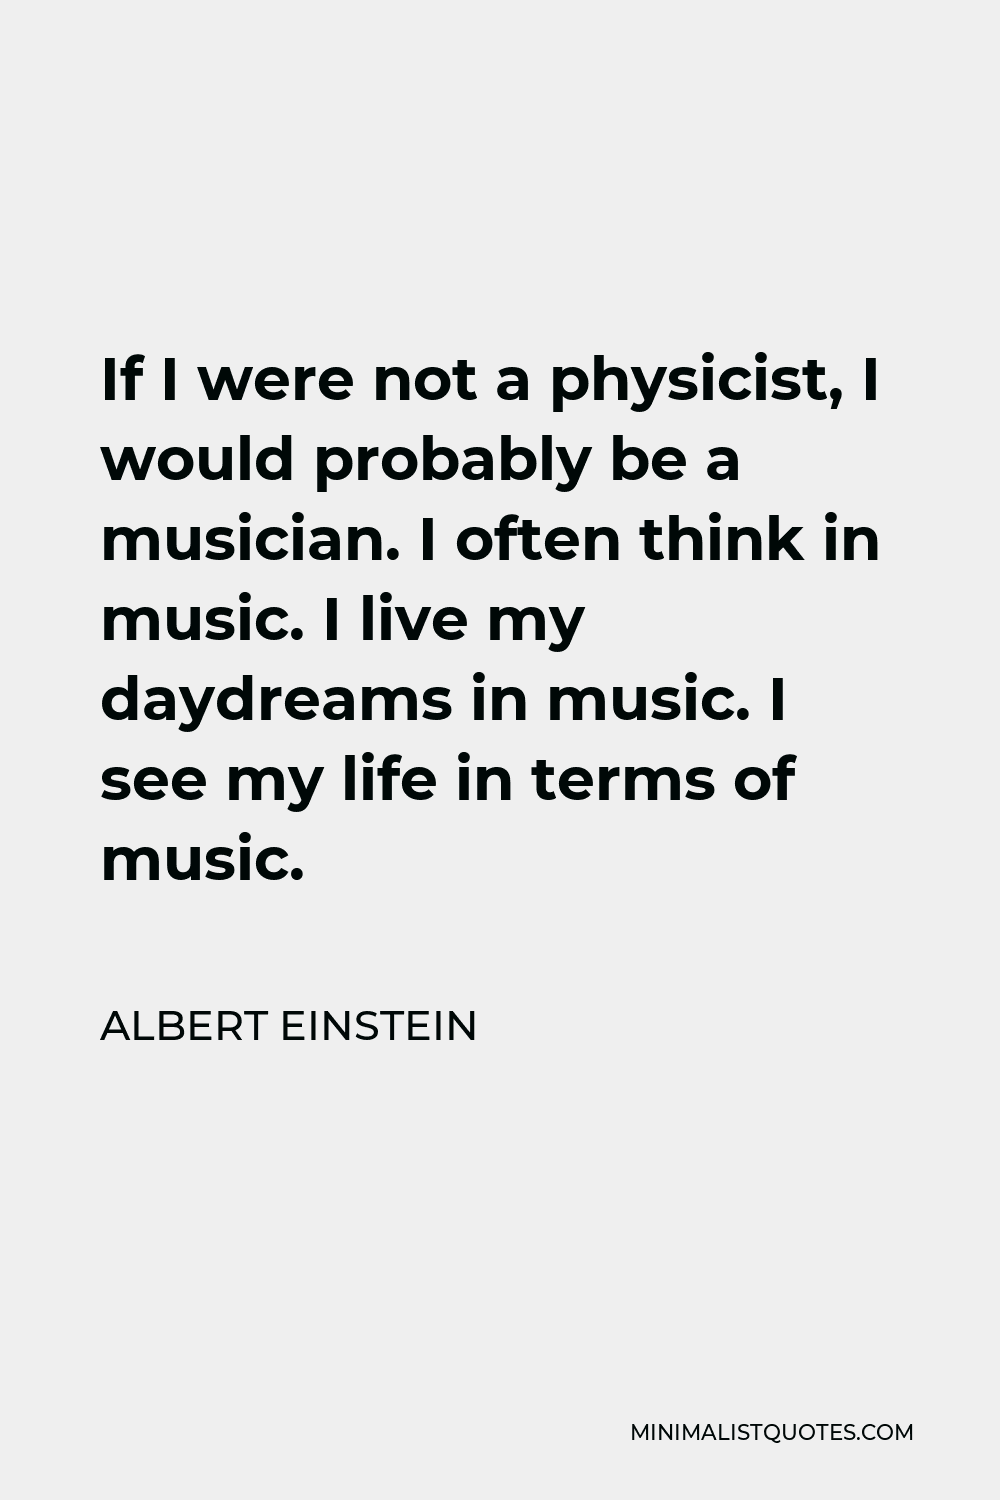 Albert Einstein Quote - If I were not a physicist, I would probably be a musician. I often think in music. I live my daydreams in music. I see my life in terms of music.